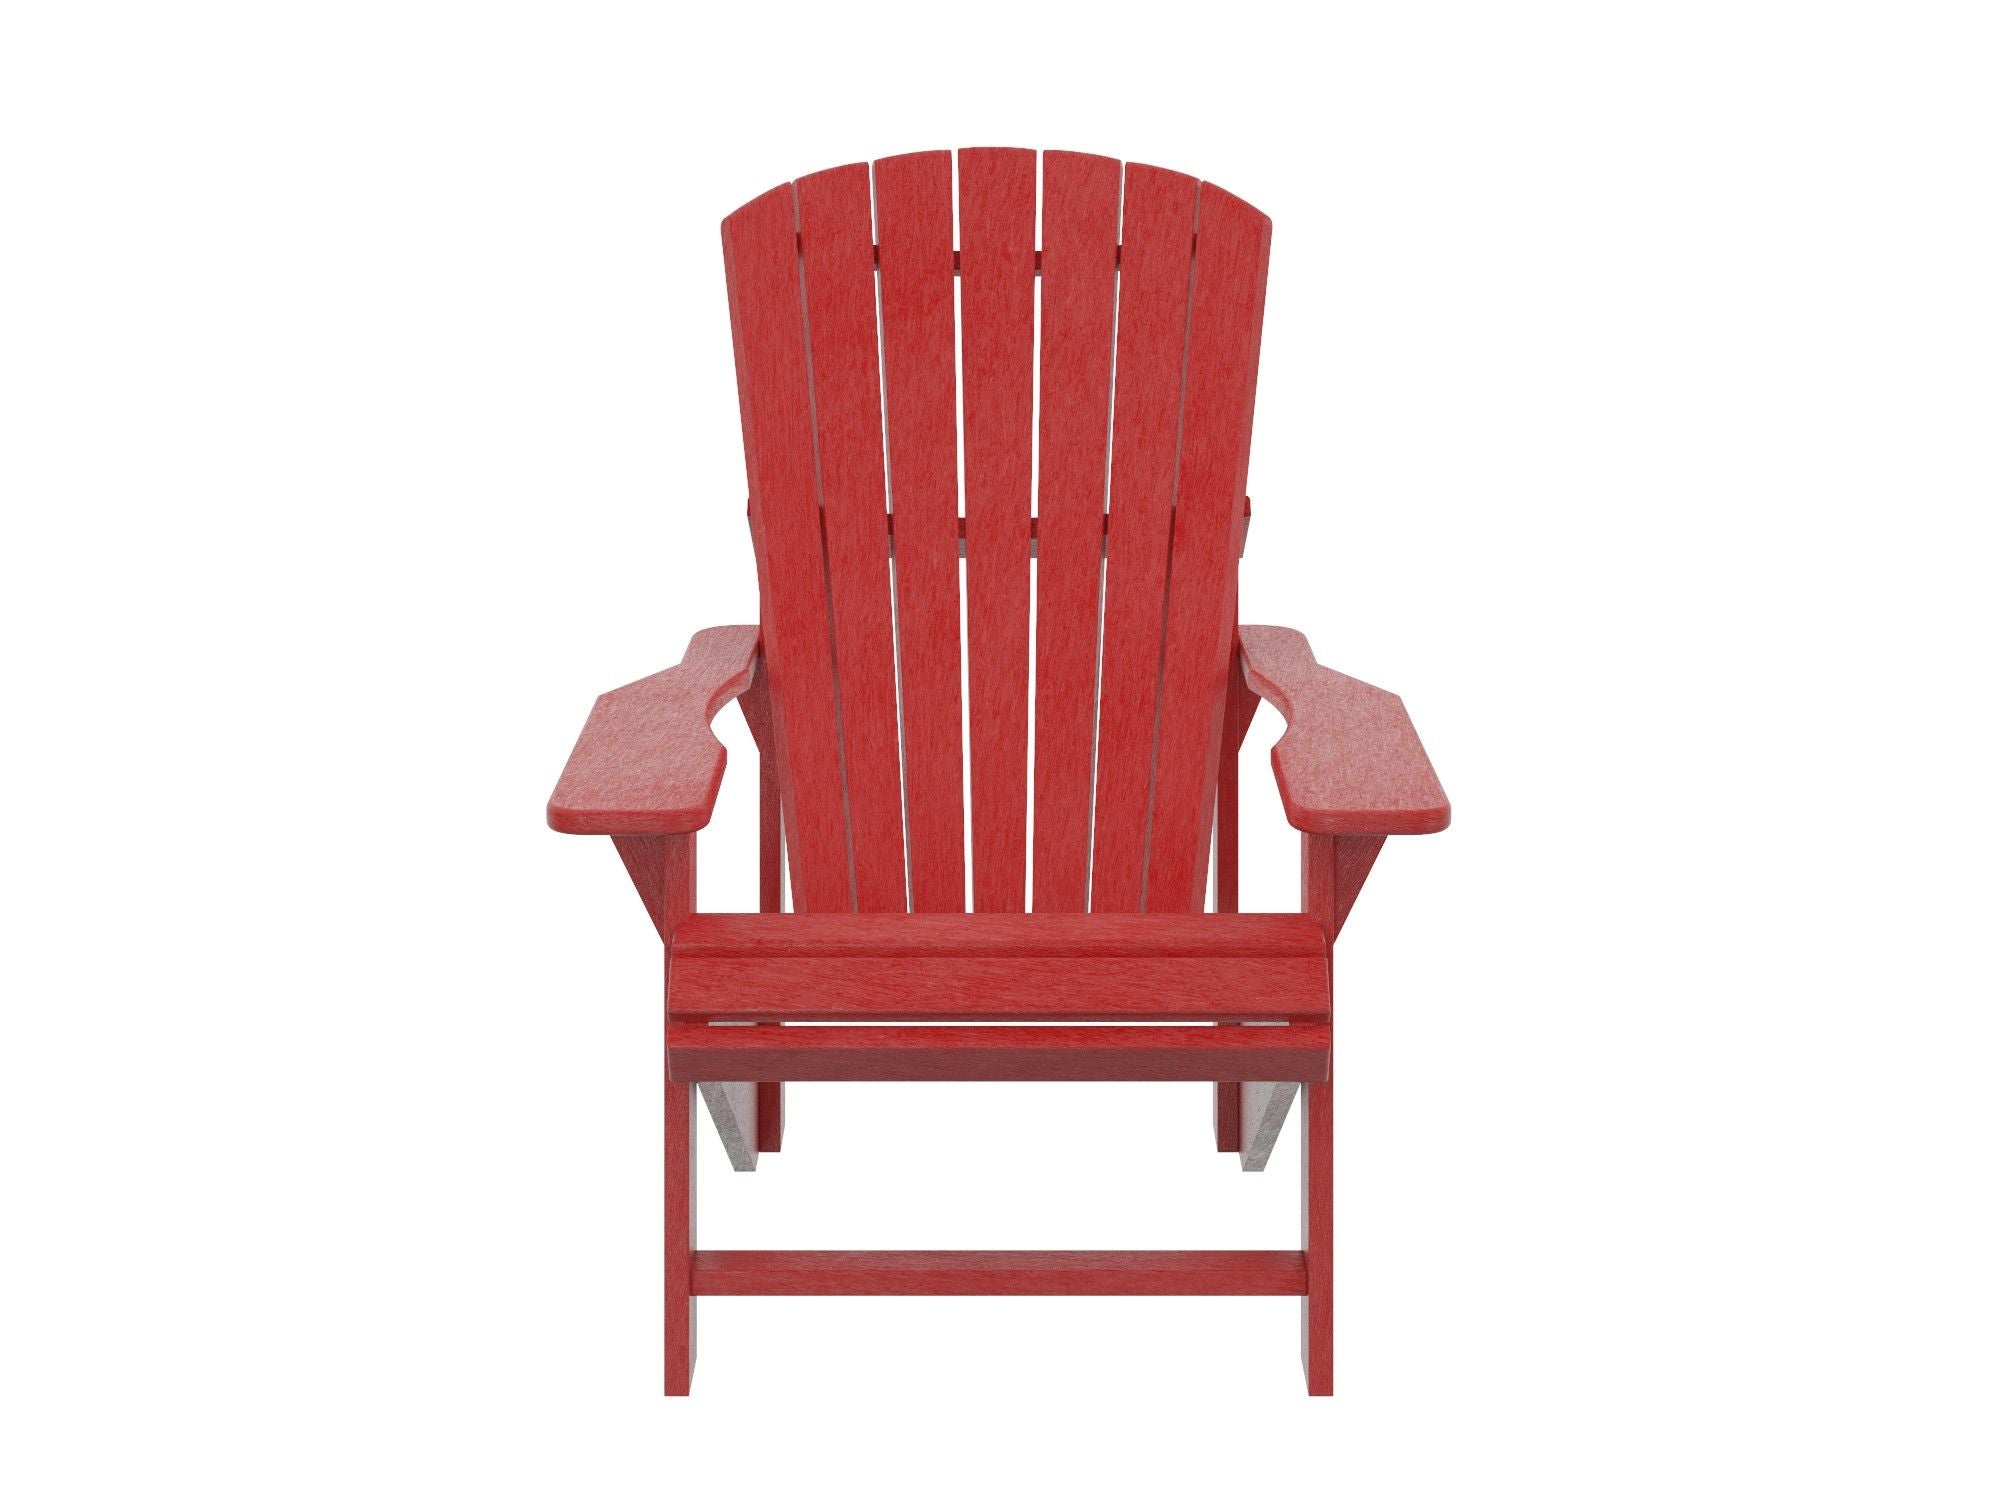 C.R. Plastic Products Classic Adirondack Chairs Outdoor Chairs